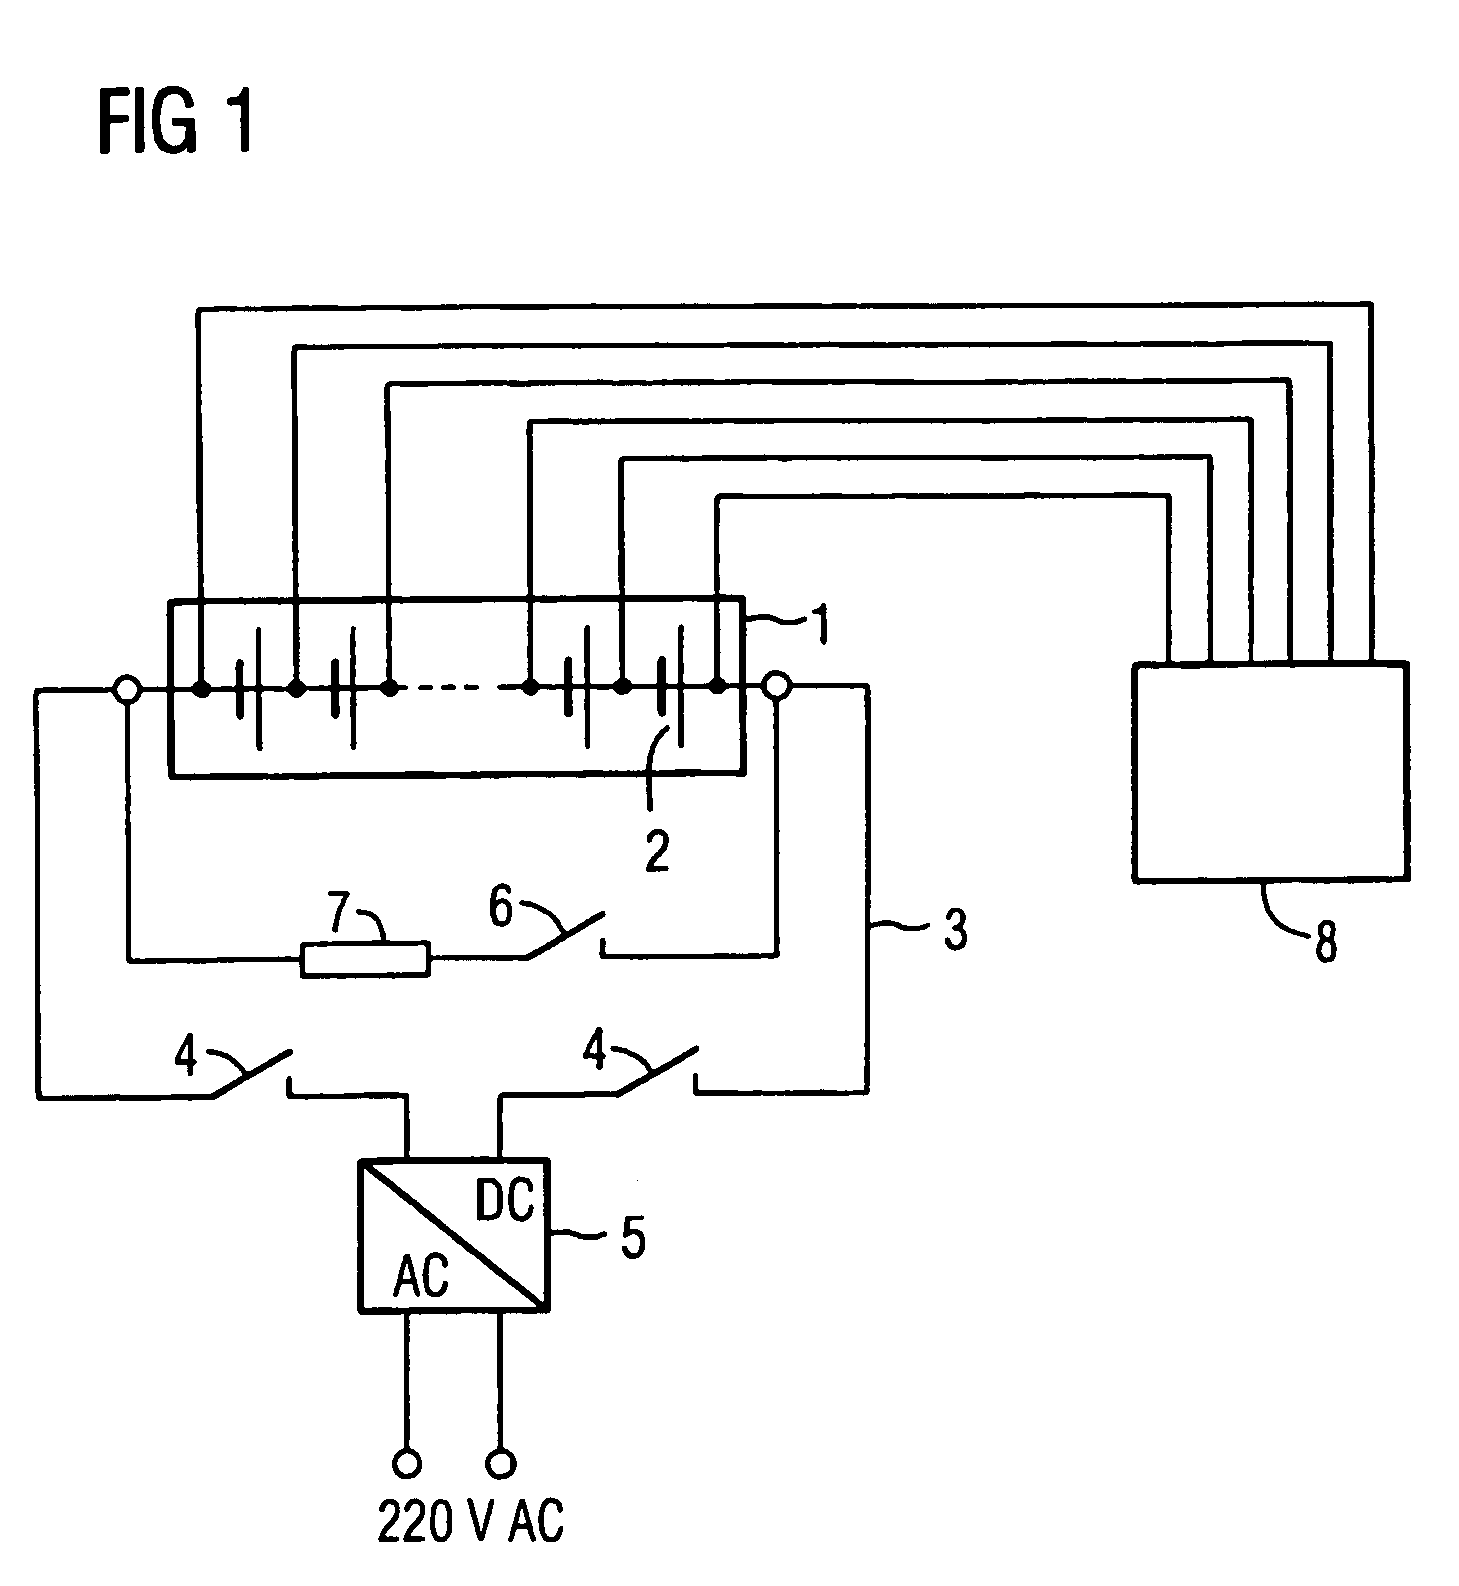 Method for detecting a gas leak in a pem fuel cell